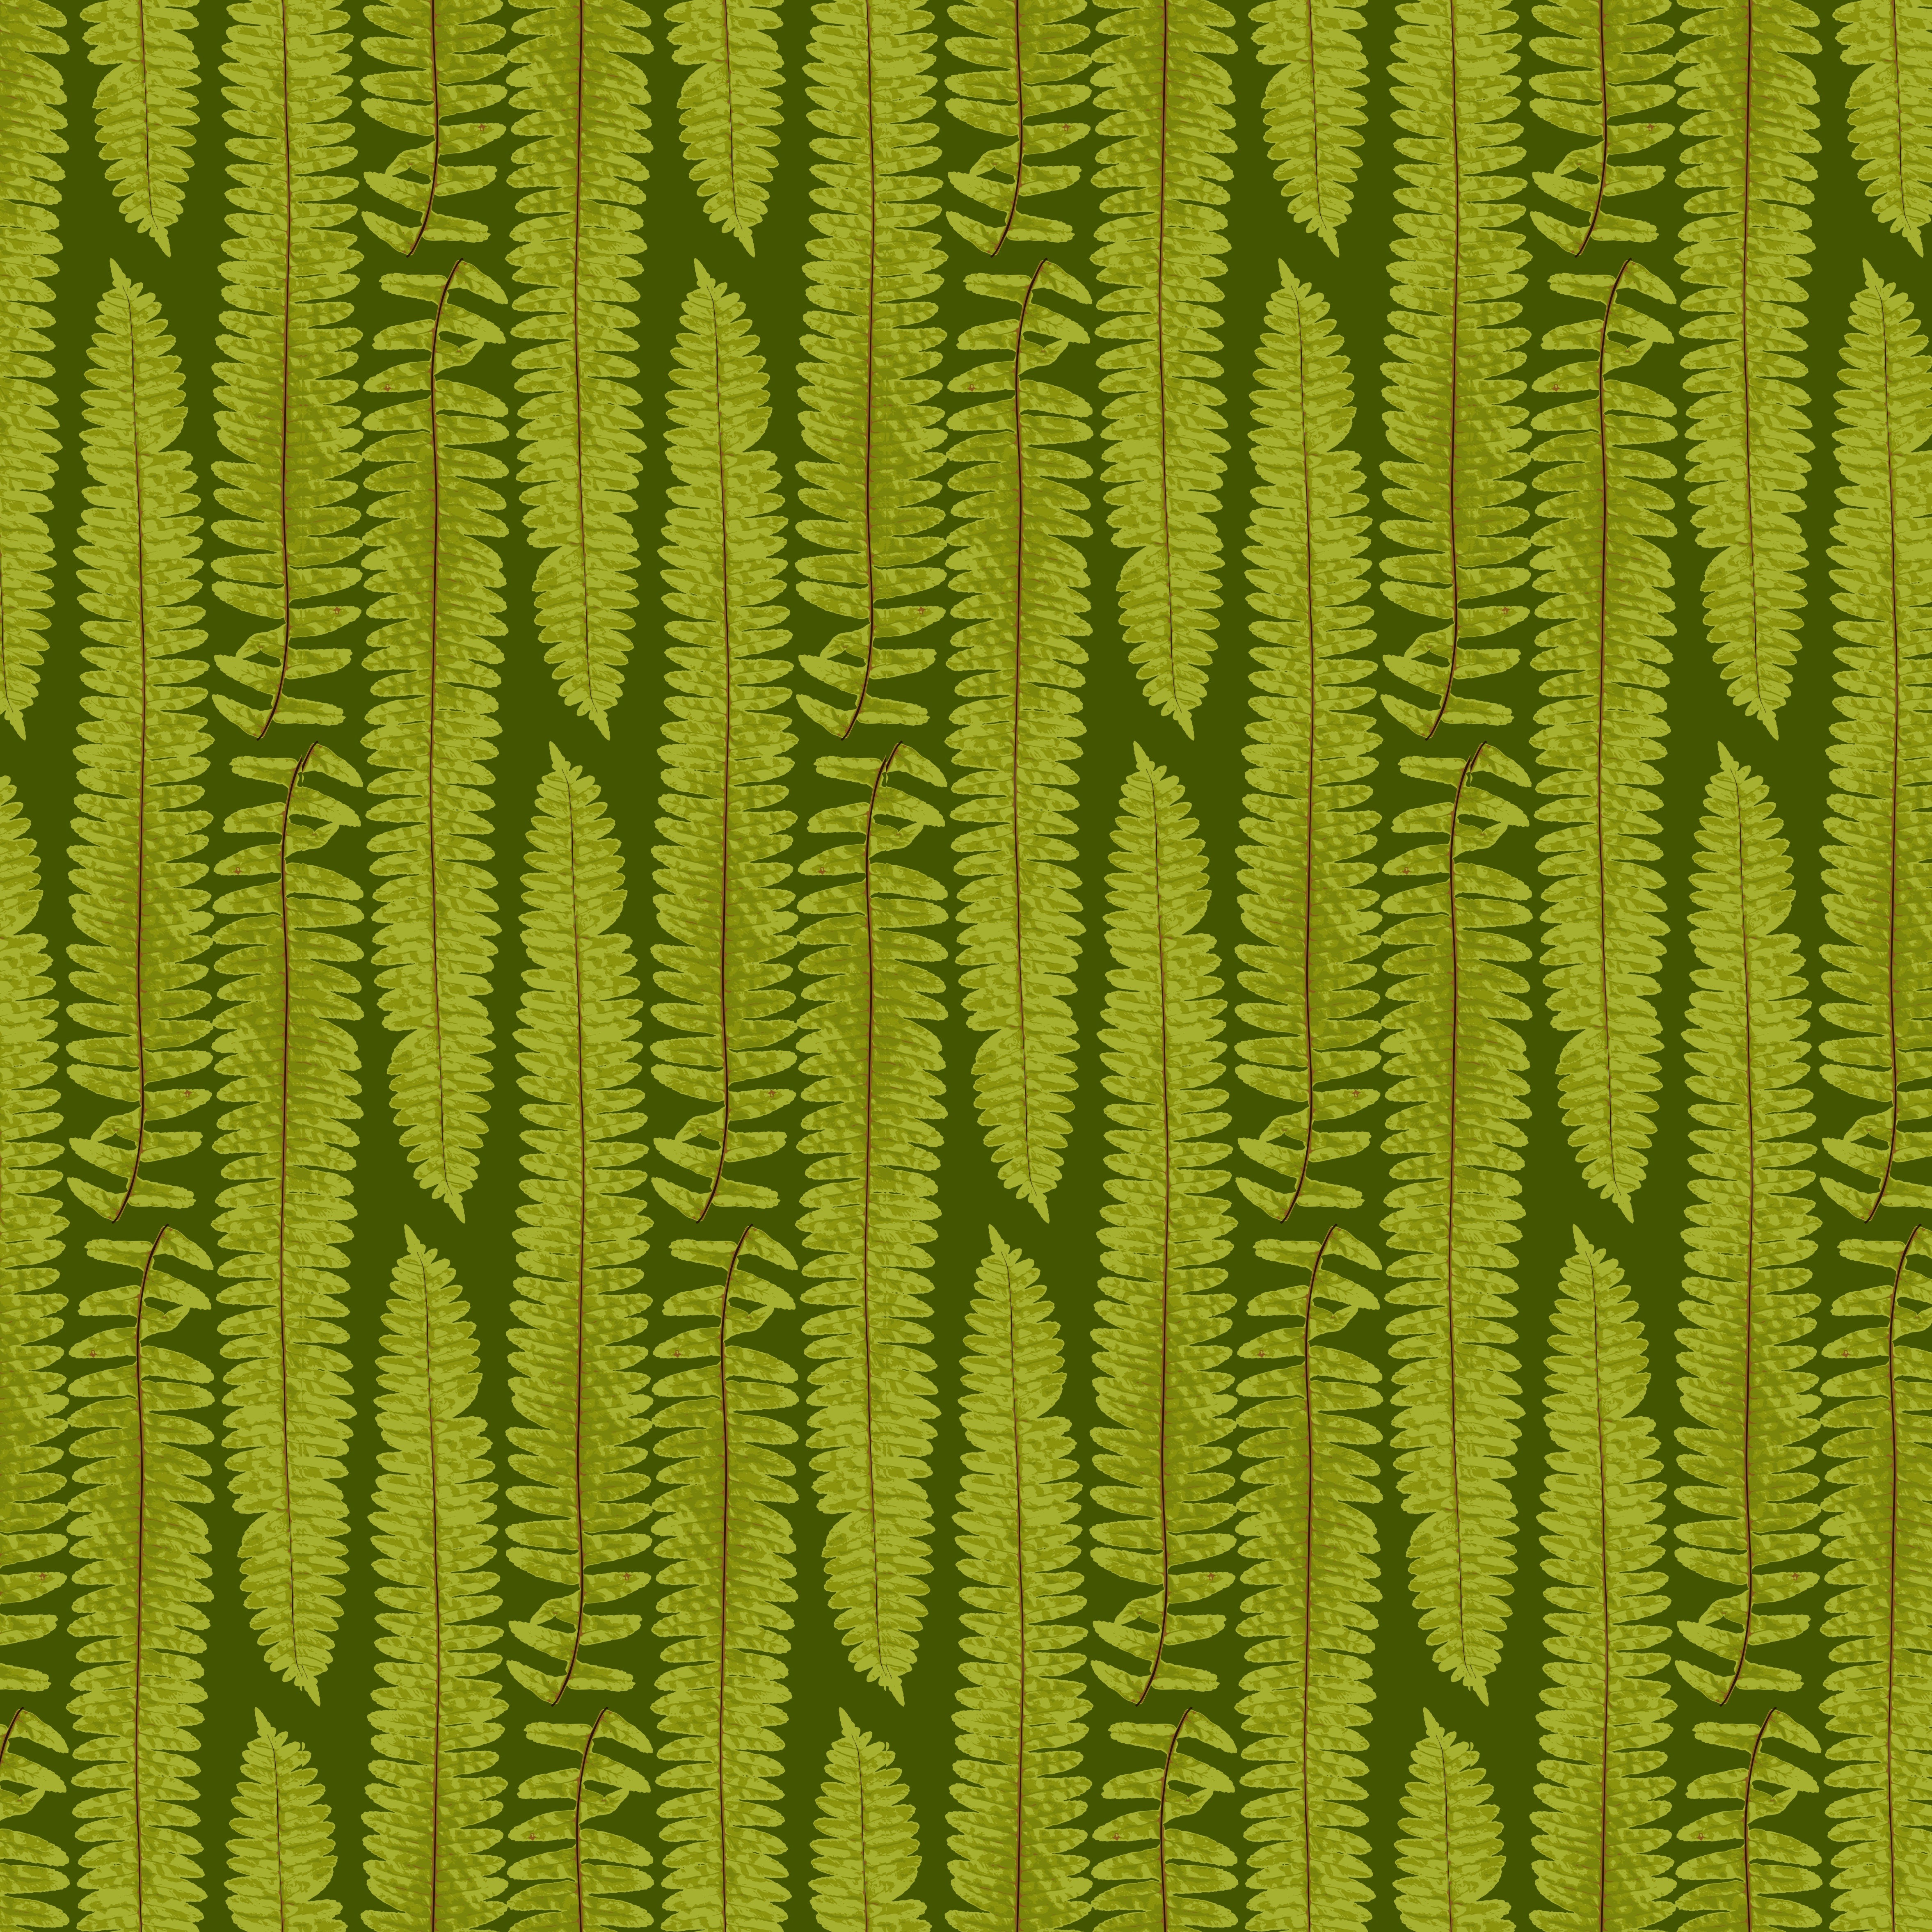 1080p pic art, textures, green, leaves